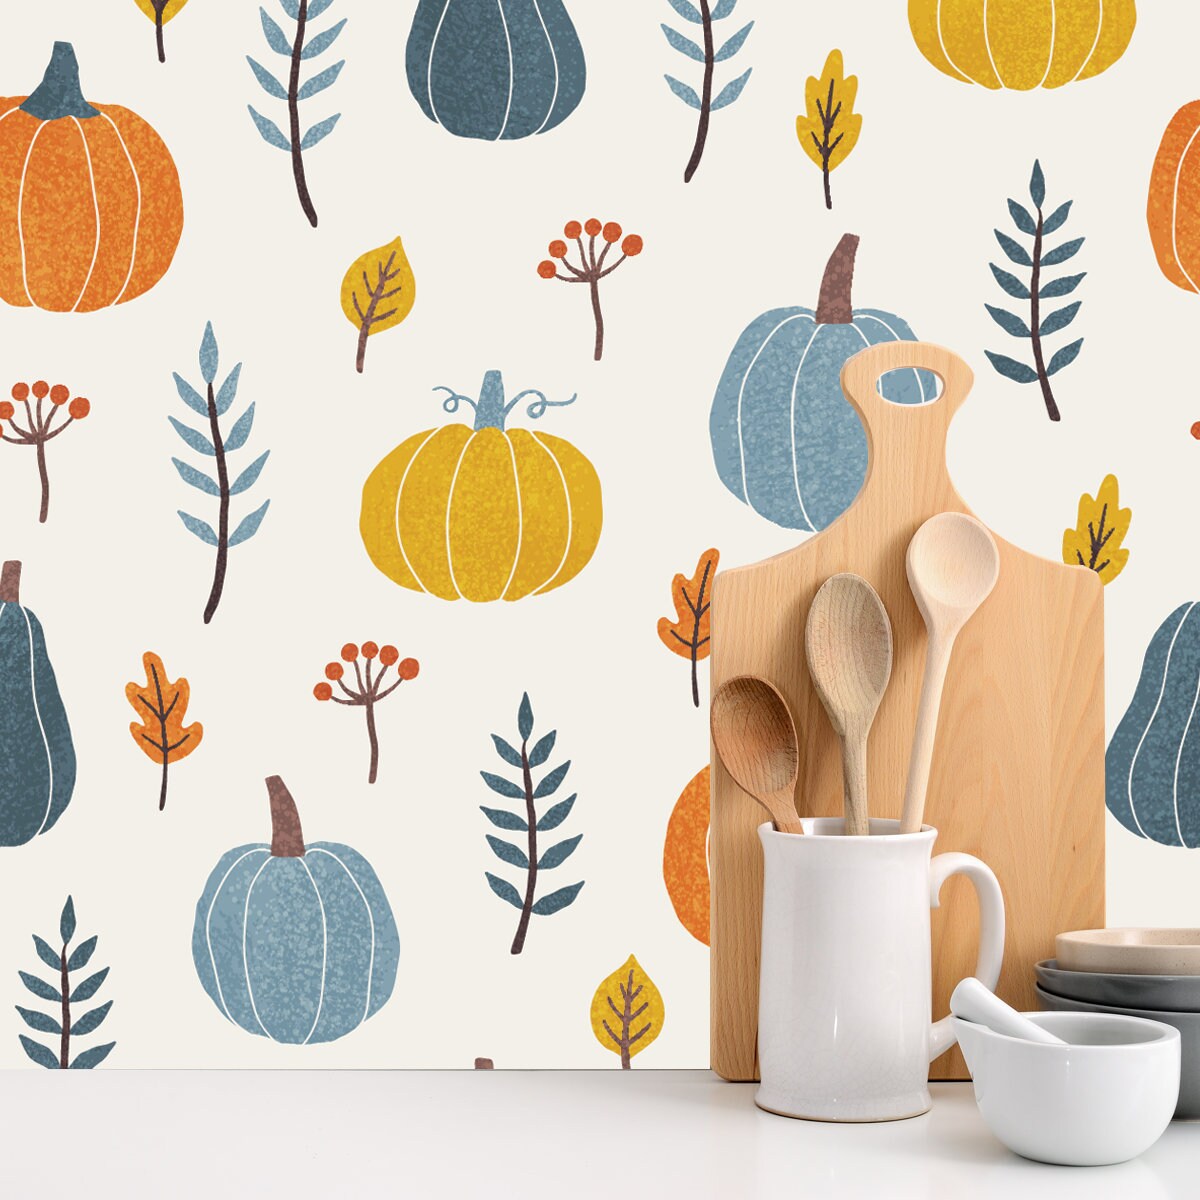 Colorful Pumpkins, Leafs and Branches. Seasonal Autumn Seamless Pattern Wallpaper Kitchen Mural